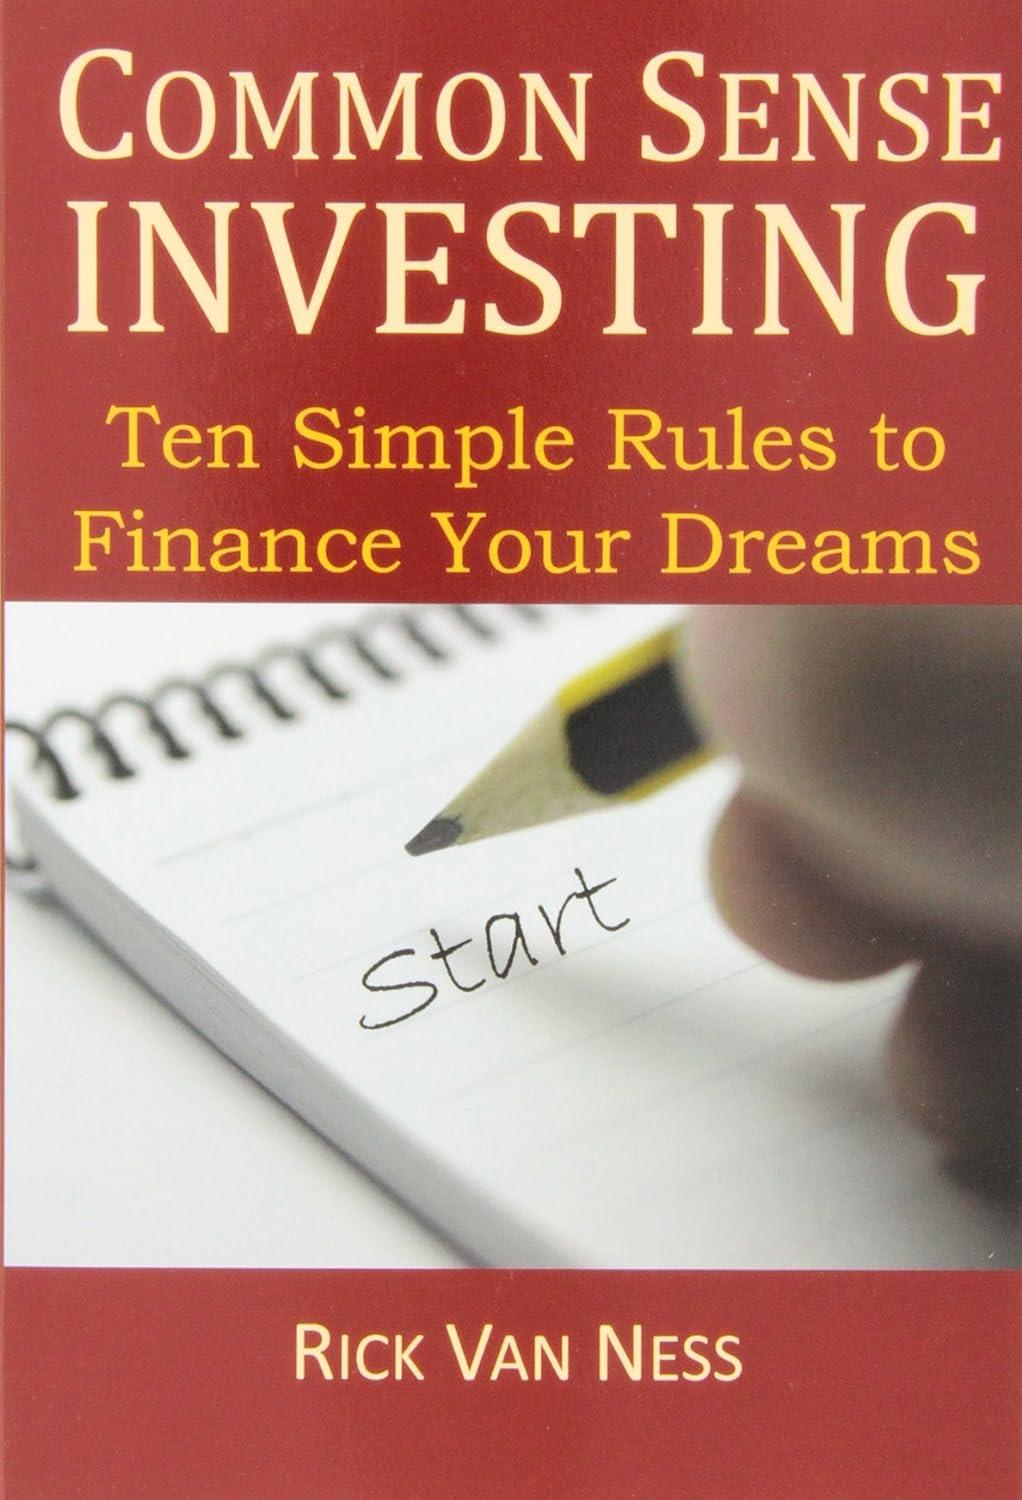 common sense investing ten simple rules to finance your dreams 1st edition rick van ness 0985800410,